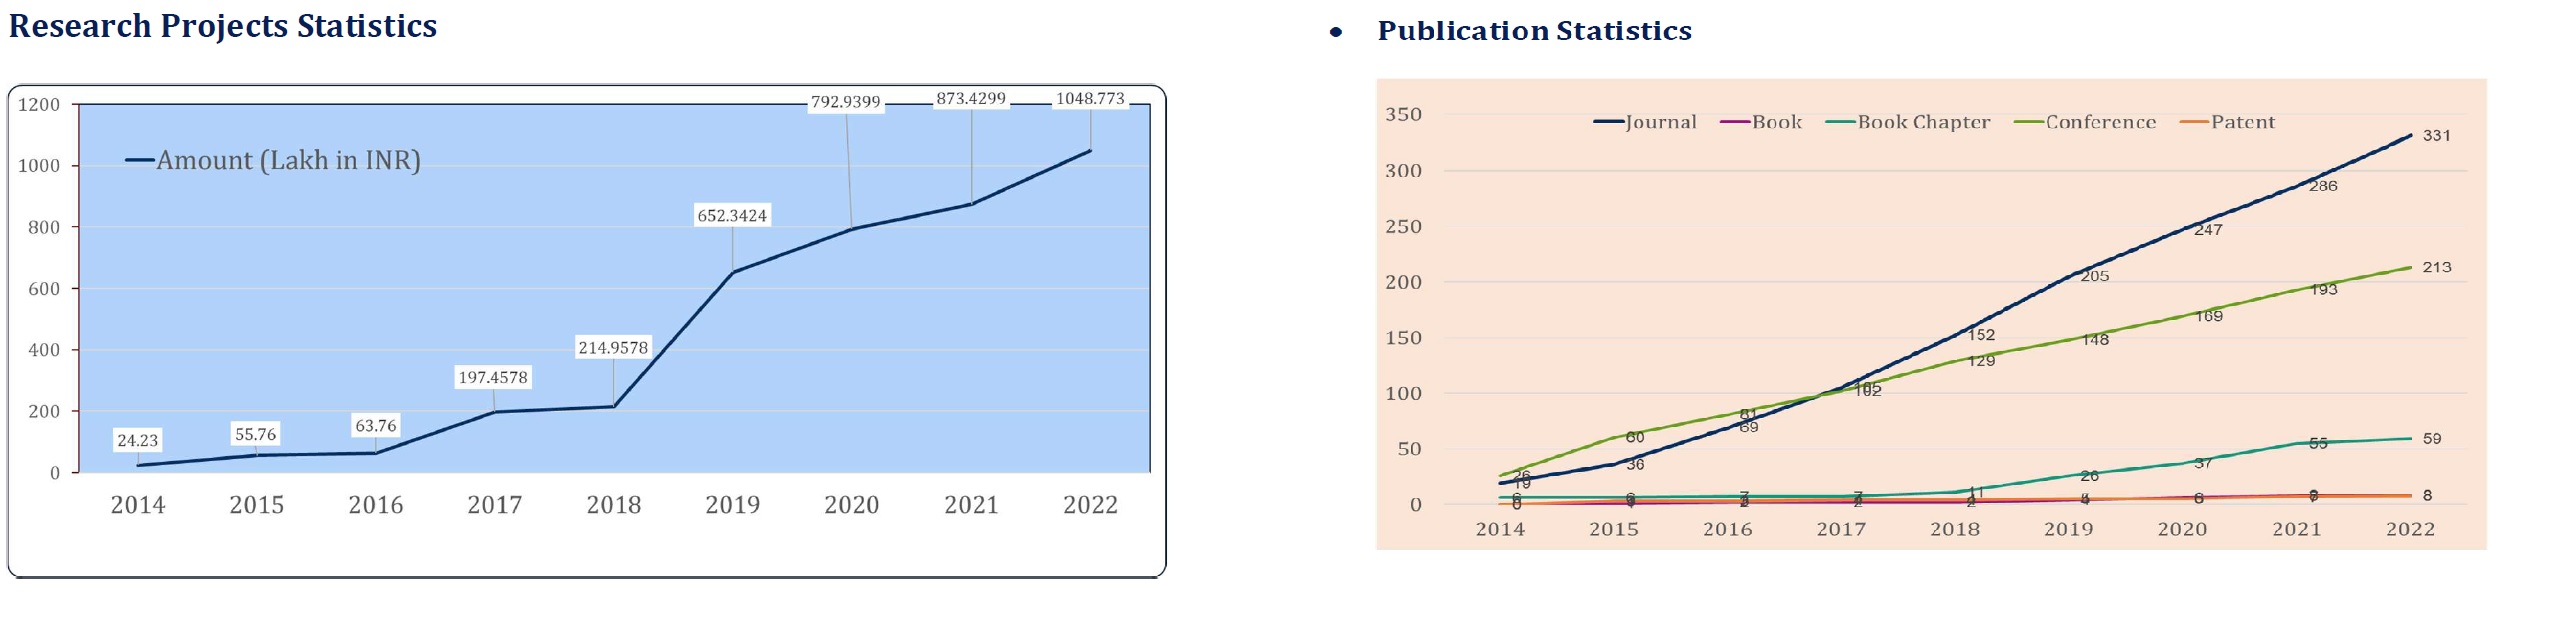 Research Projects and Publication Statistics from 2014 to 2022